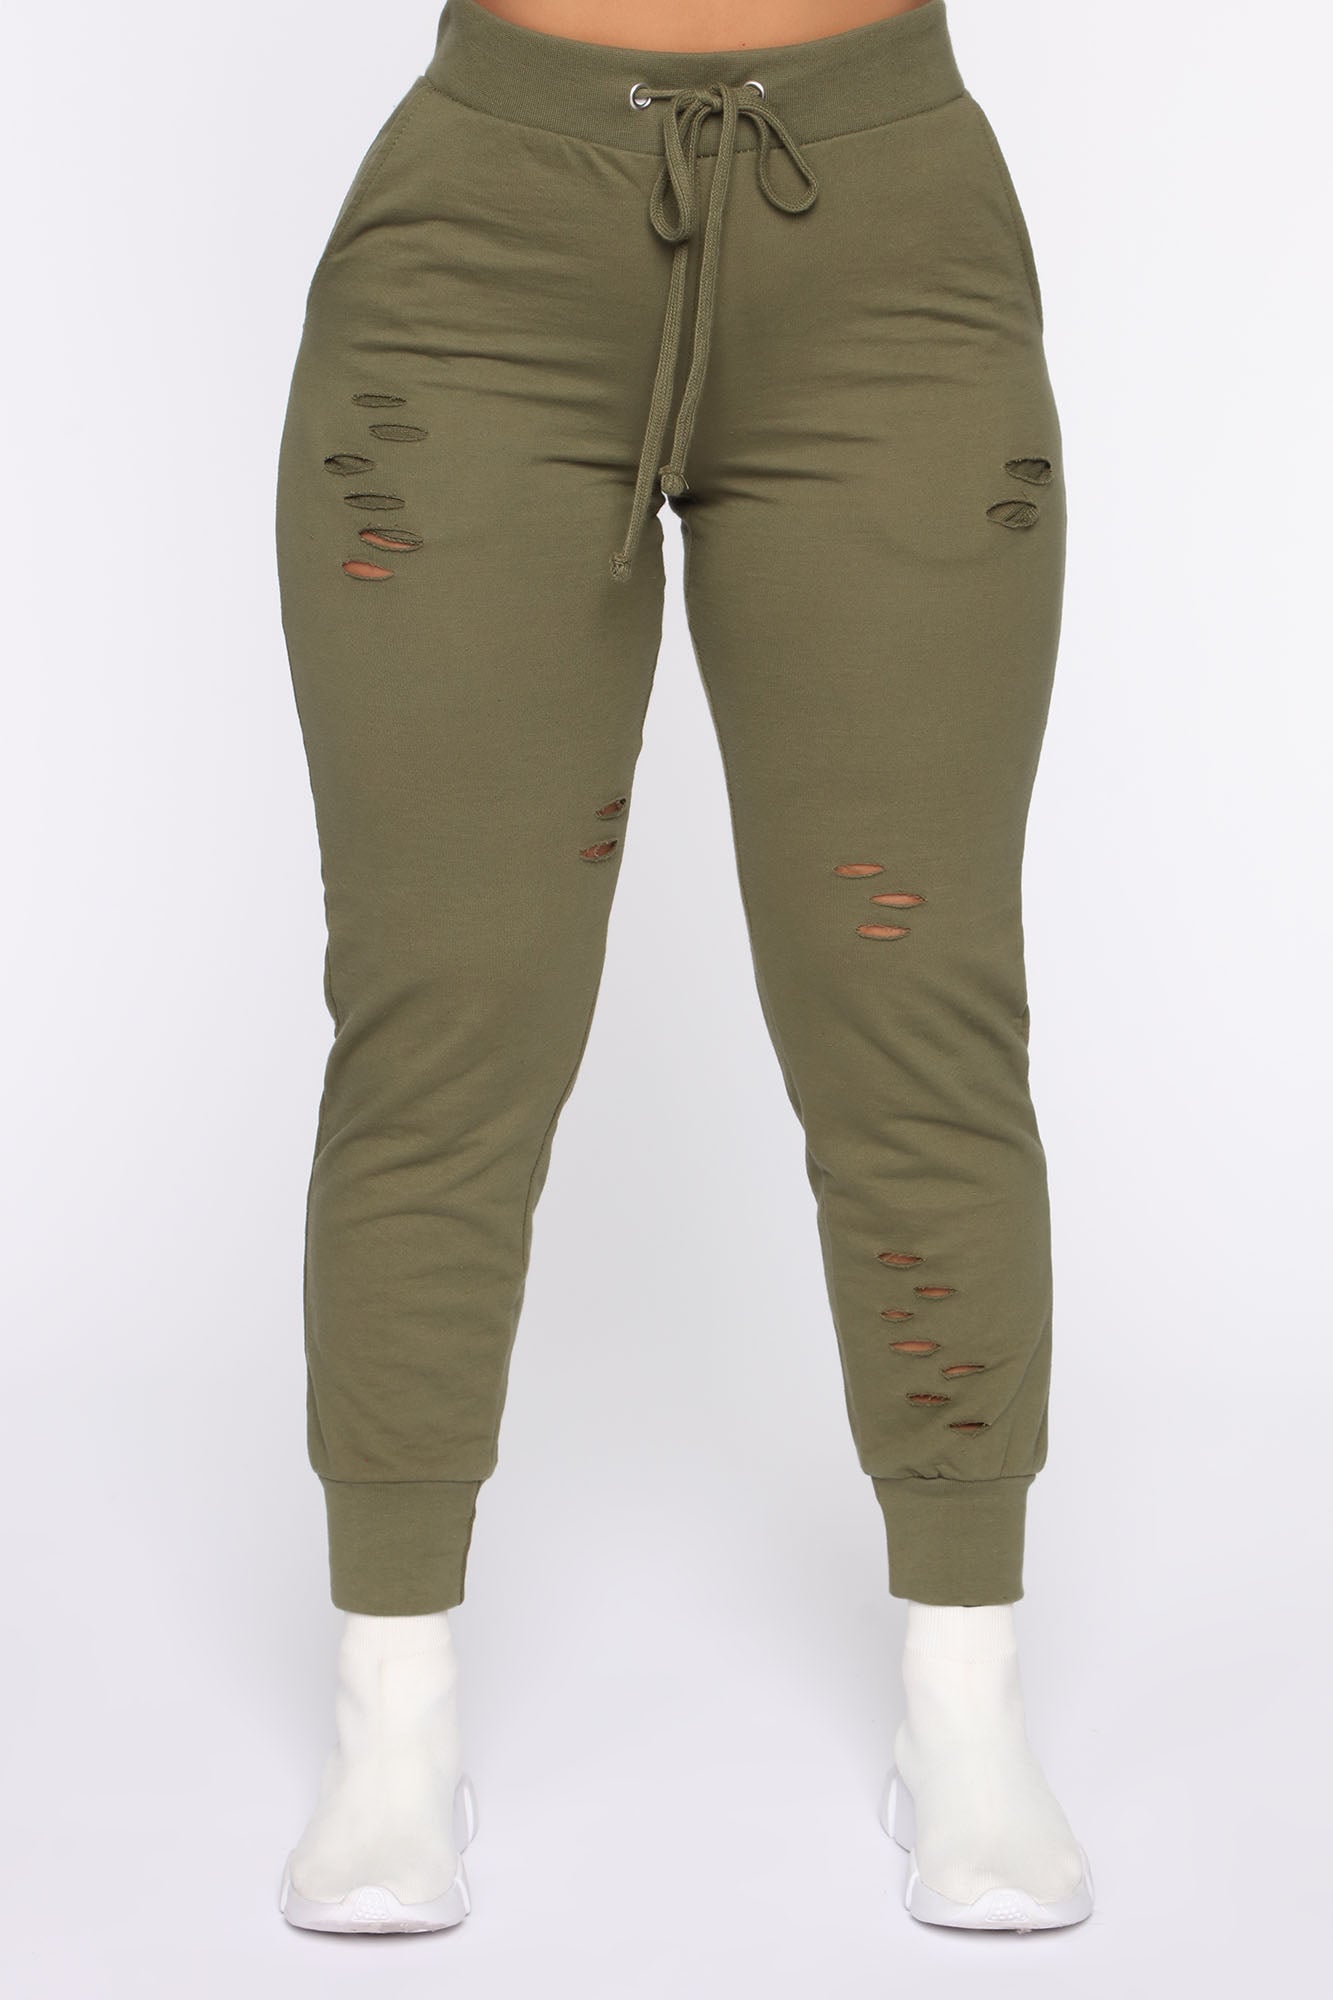 Distressed Olive Green Joggers